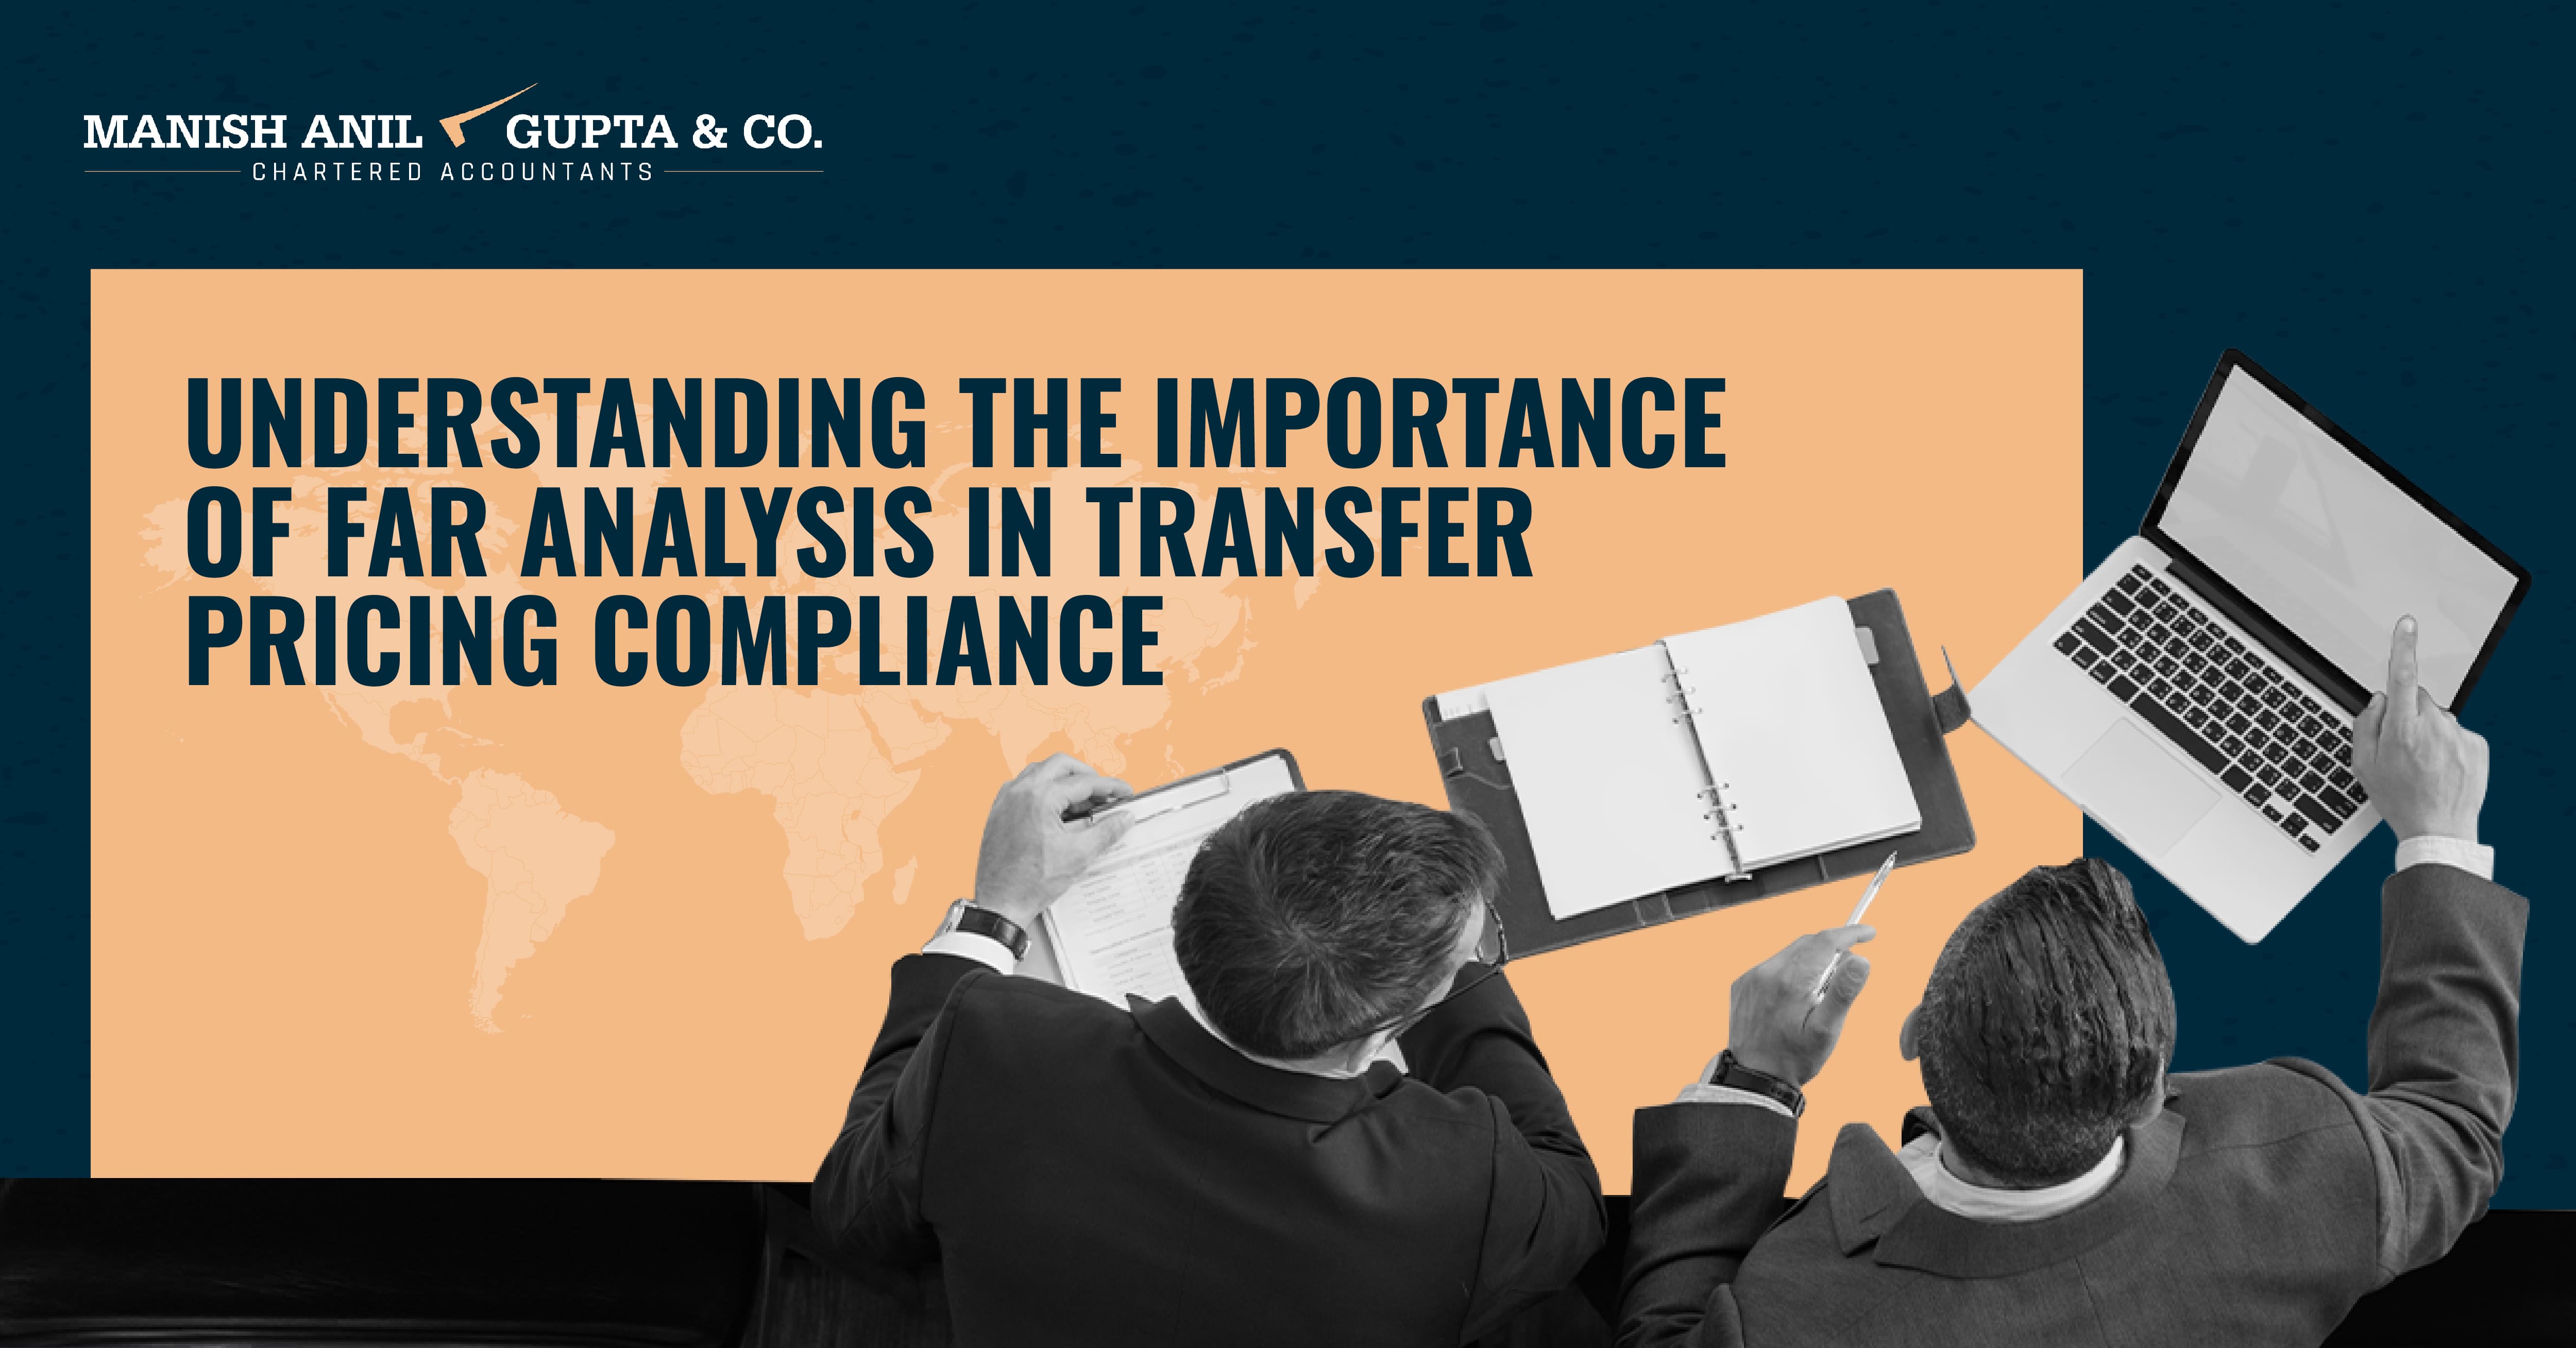 Understanding the Importance of FAR Analysis in Transfer Pricing Compliance